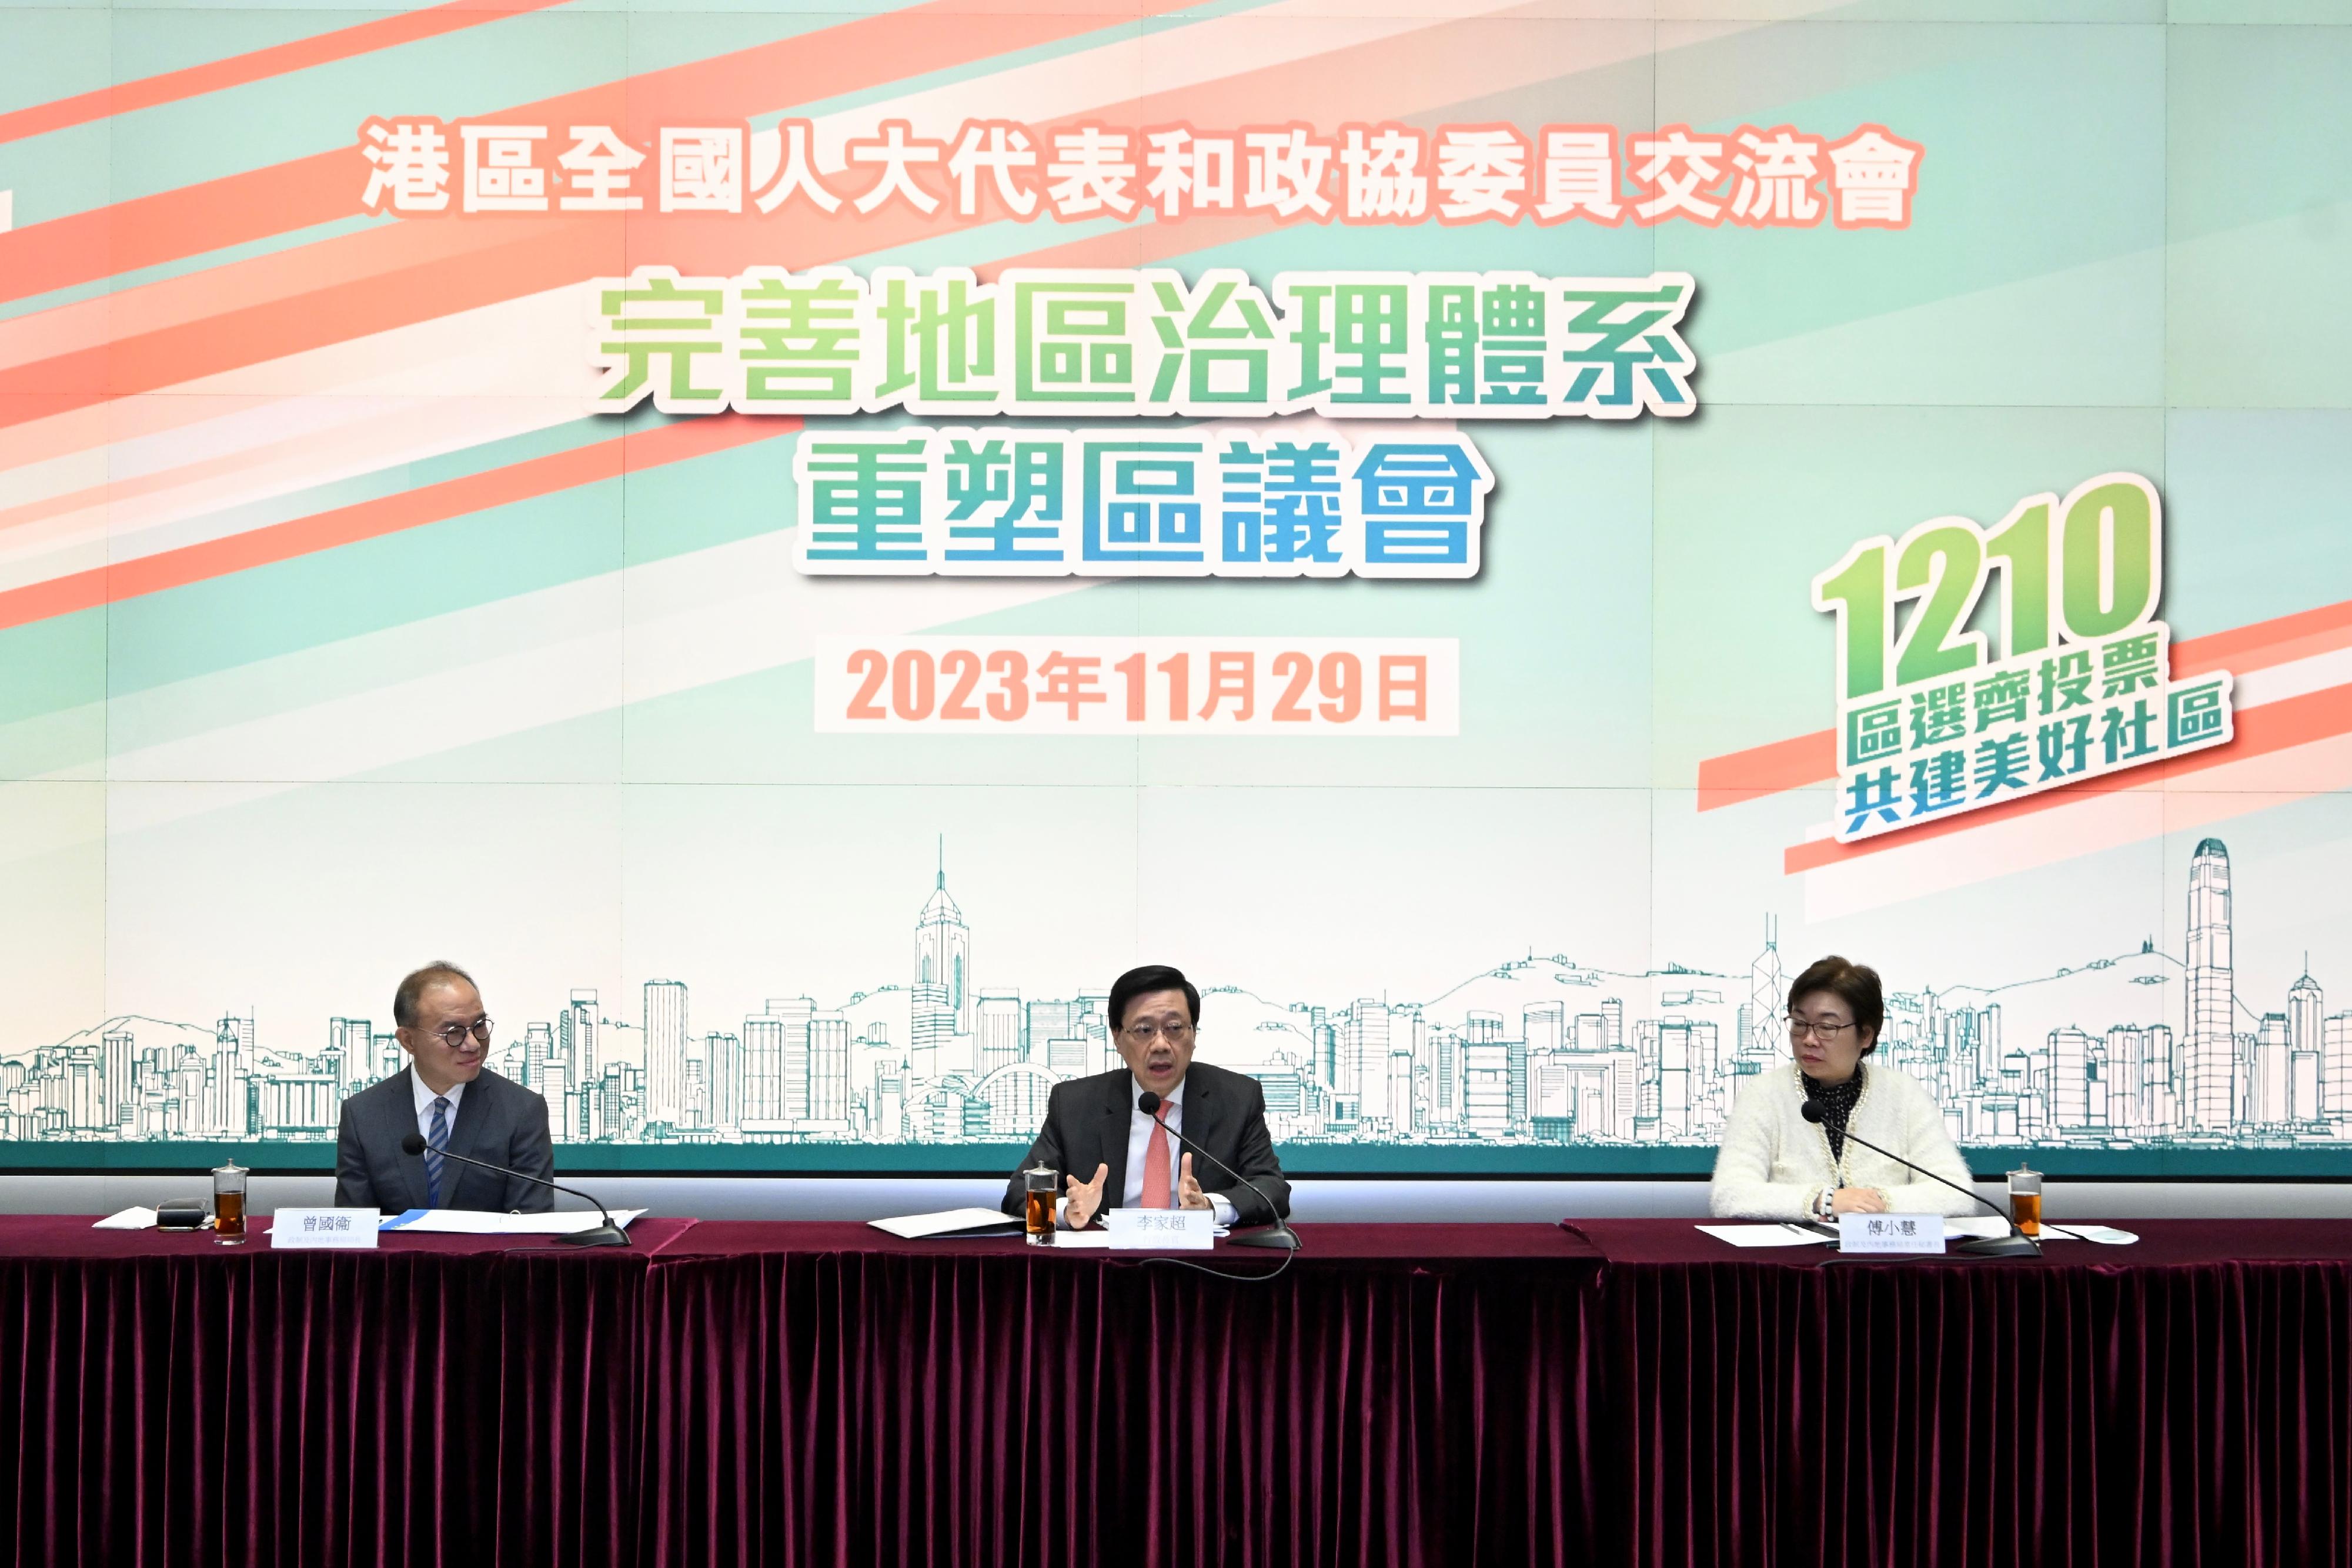 The Chief Executive, Mr John Lee (centre); the Secretary for Constitutional and Mainland Affairs, Mr Erick Tsang Kwok-wai (left); and the Permanent Secretary for Constitutional and Mainland Affairs, Ms Gracie Foo (right), chair the meetings on the theme of "improving the district governance system and reforming the District Councils" at the Central Government Offices today (November 29) to exchange views on improving the district governance system and supporting the District Council election with Hong Kong Special Administrative Region (HKSAR) deputies to the National People's Congress and HKSAR members of the National Committee of the Chinese People's Political Consultative Conference.